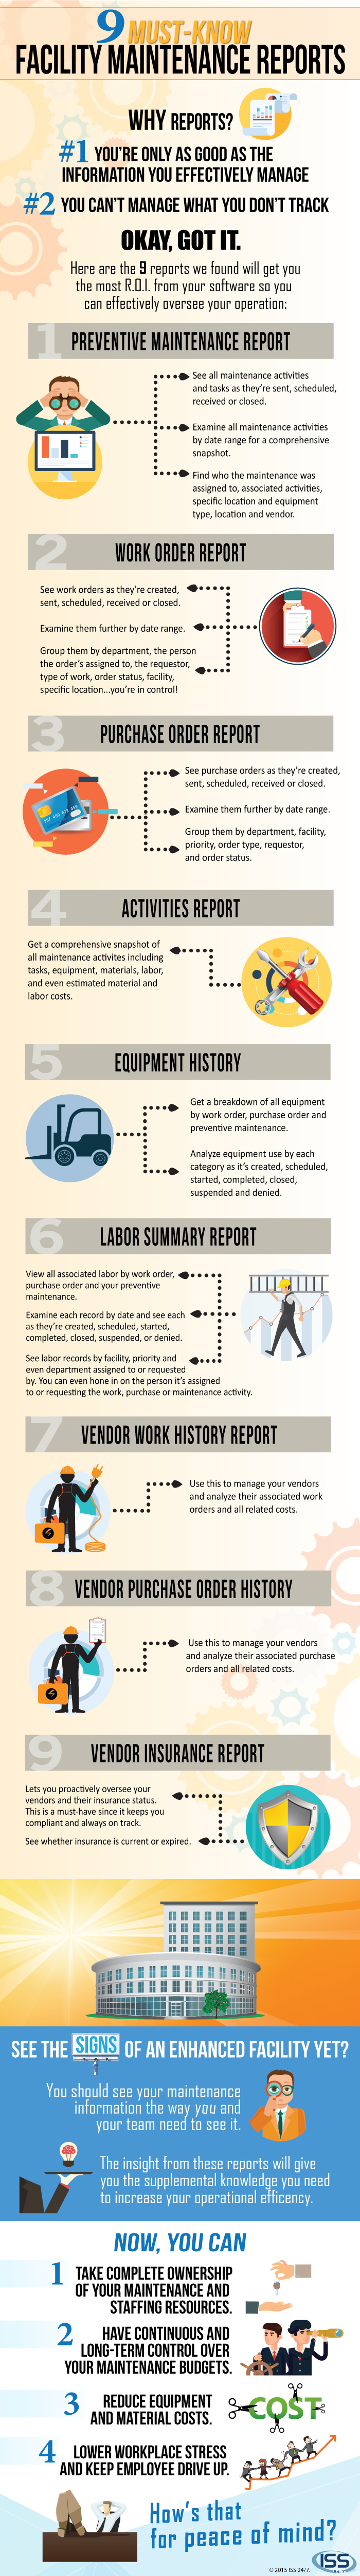 9-must-know-facility-maintenance-reports-infographic